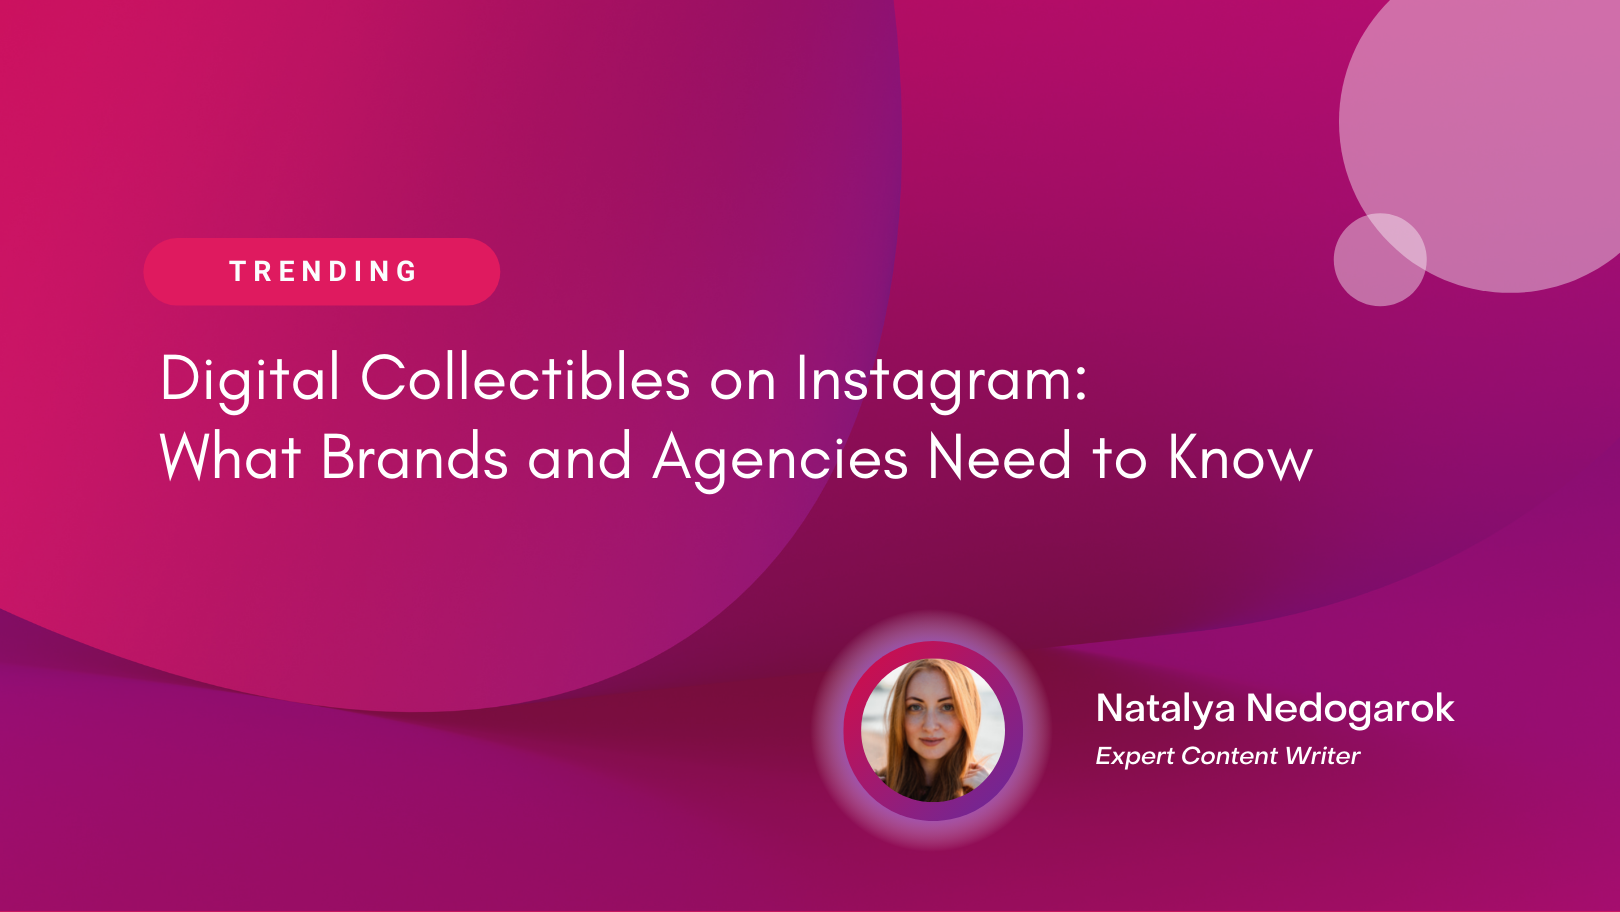 AV_digital-collectibles-on-instagram-what-brands-and-agencies-need-to-know